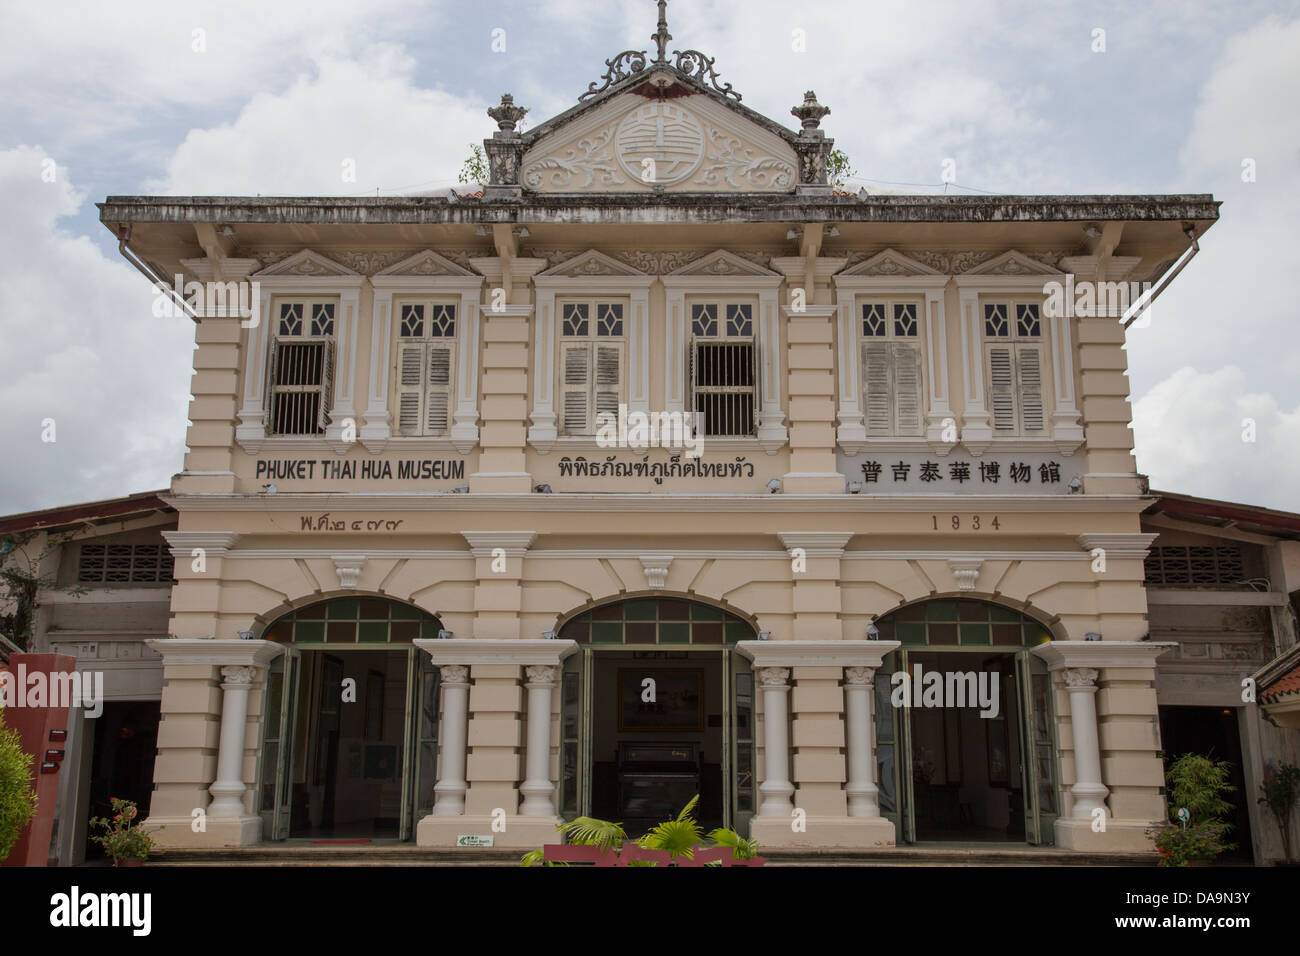 Thai Hua Museum is one of the best maintained Sino-Portuguese buildings in Phuket Town Stock Photo